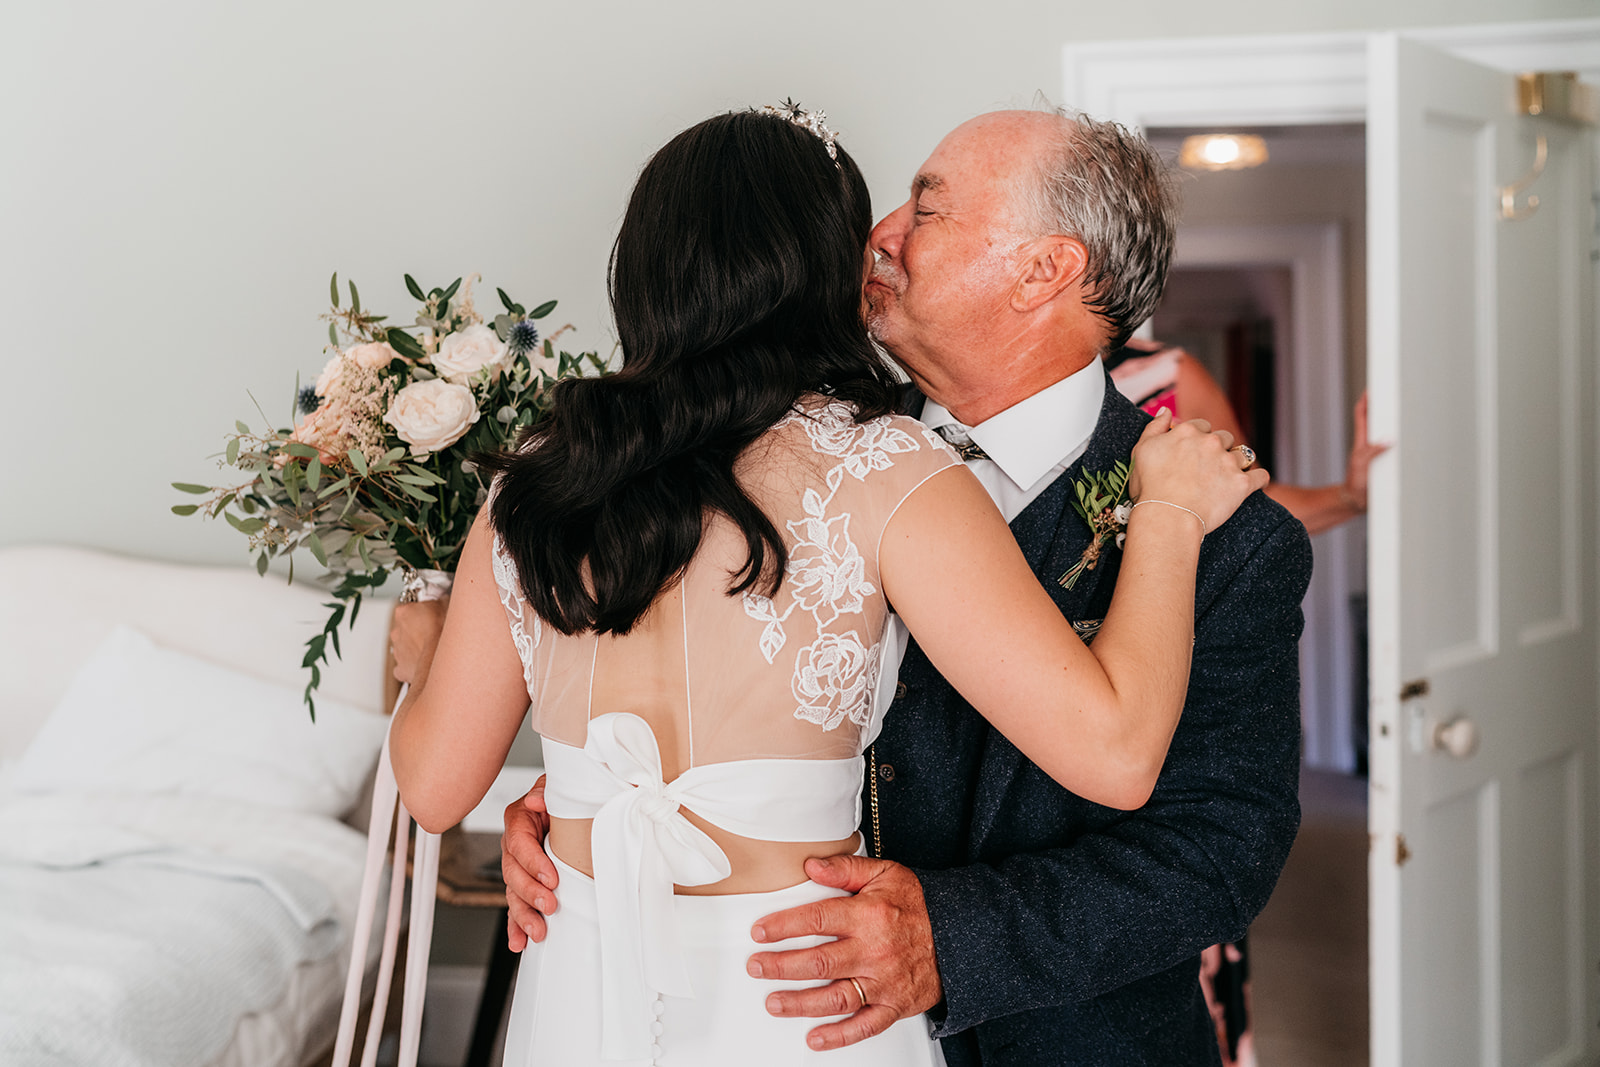 The bride and her dad sharing a hug before the walk down the aisle